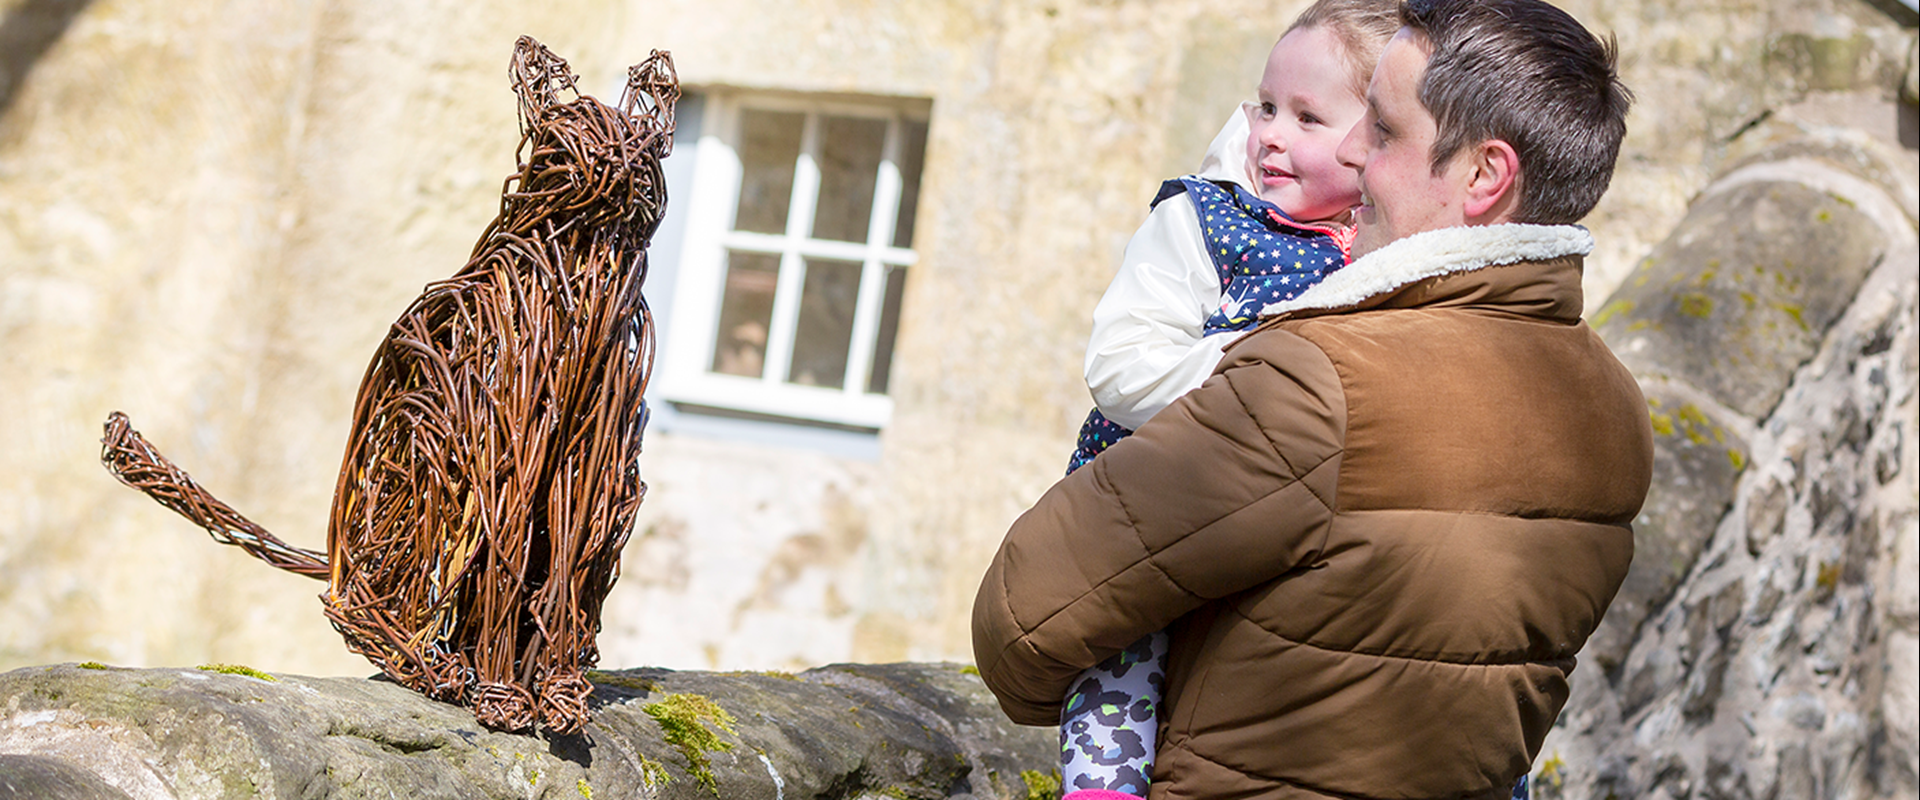 Visitors look at a willow sculpture of a cat sitting on a wall